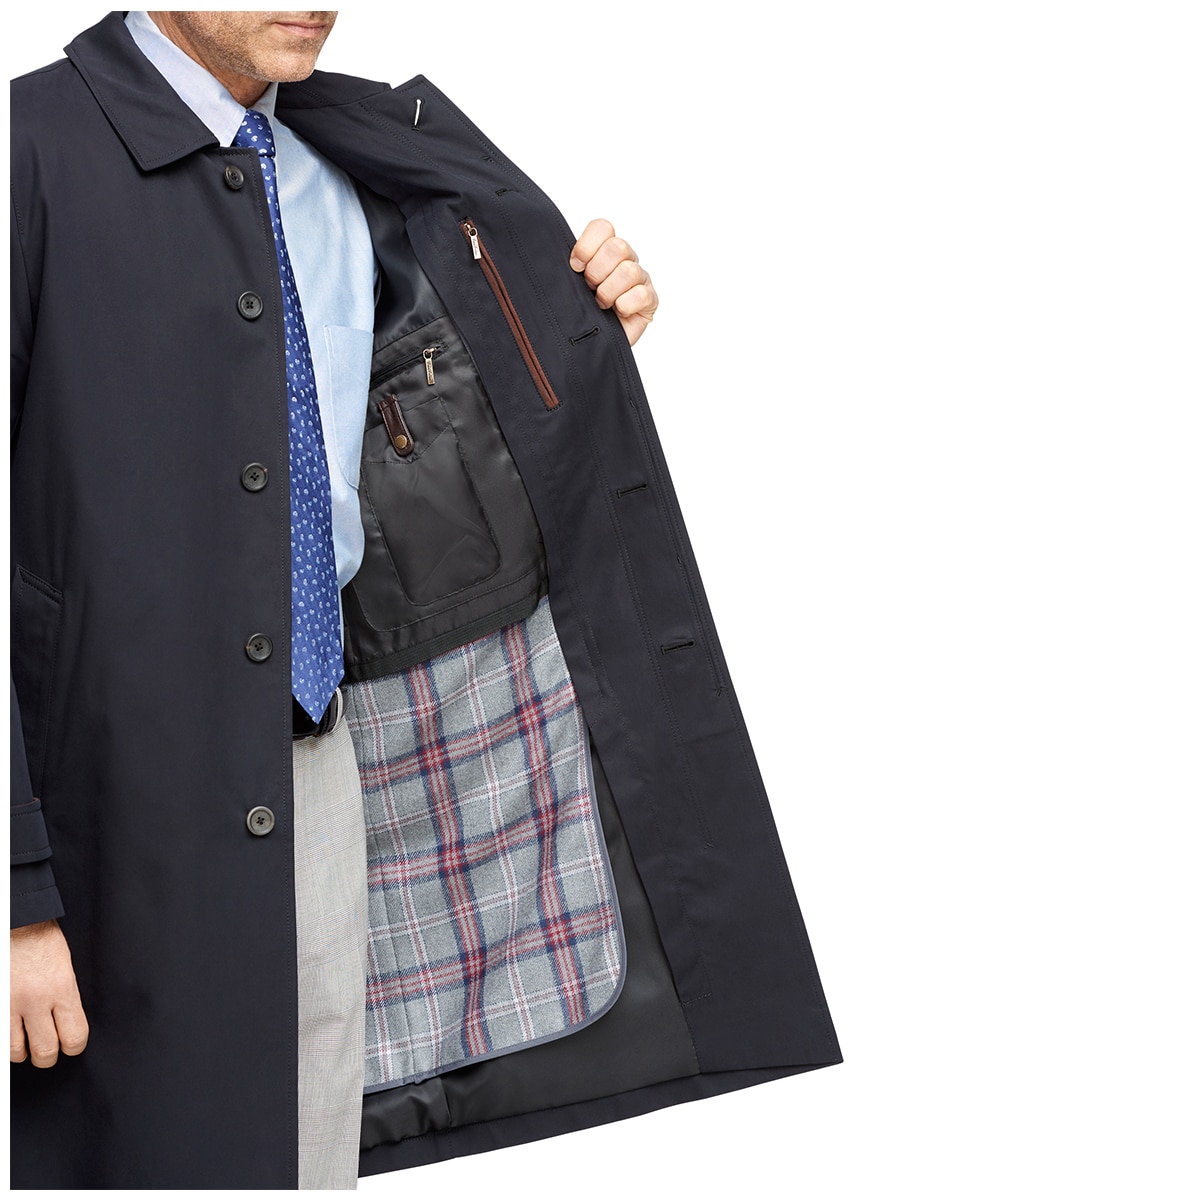 Brooks Brothers Trench coat - Navy